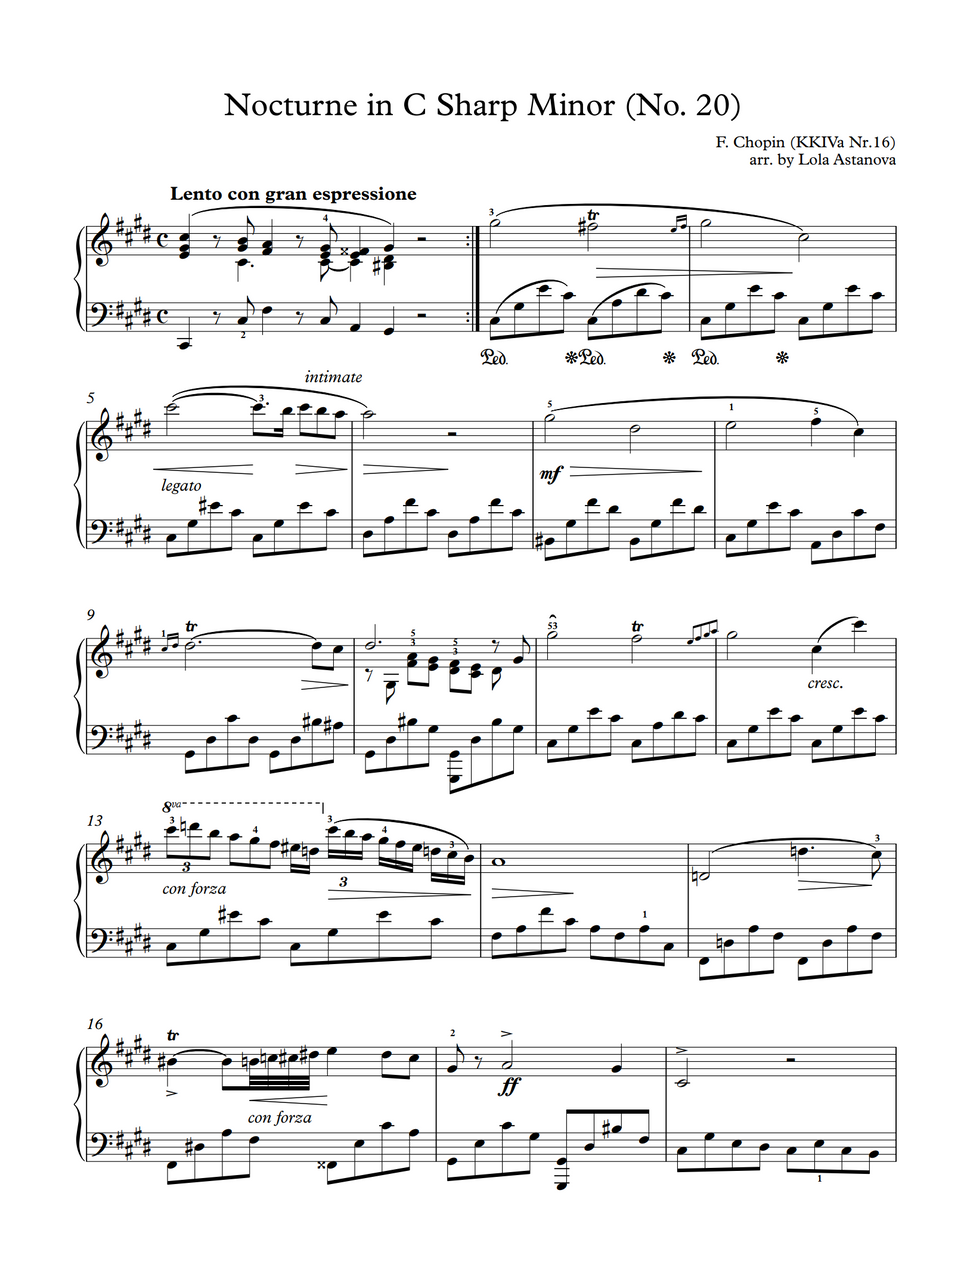 Frederic Chopin - Nocturne in C Sharp Minor, No. 20 (This compositions has original elements written and arranged by Lola Astanova) by Lola Astanova